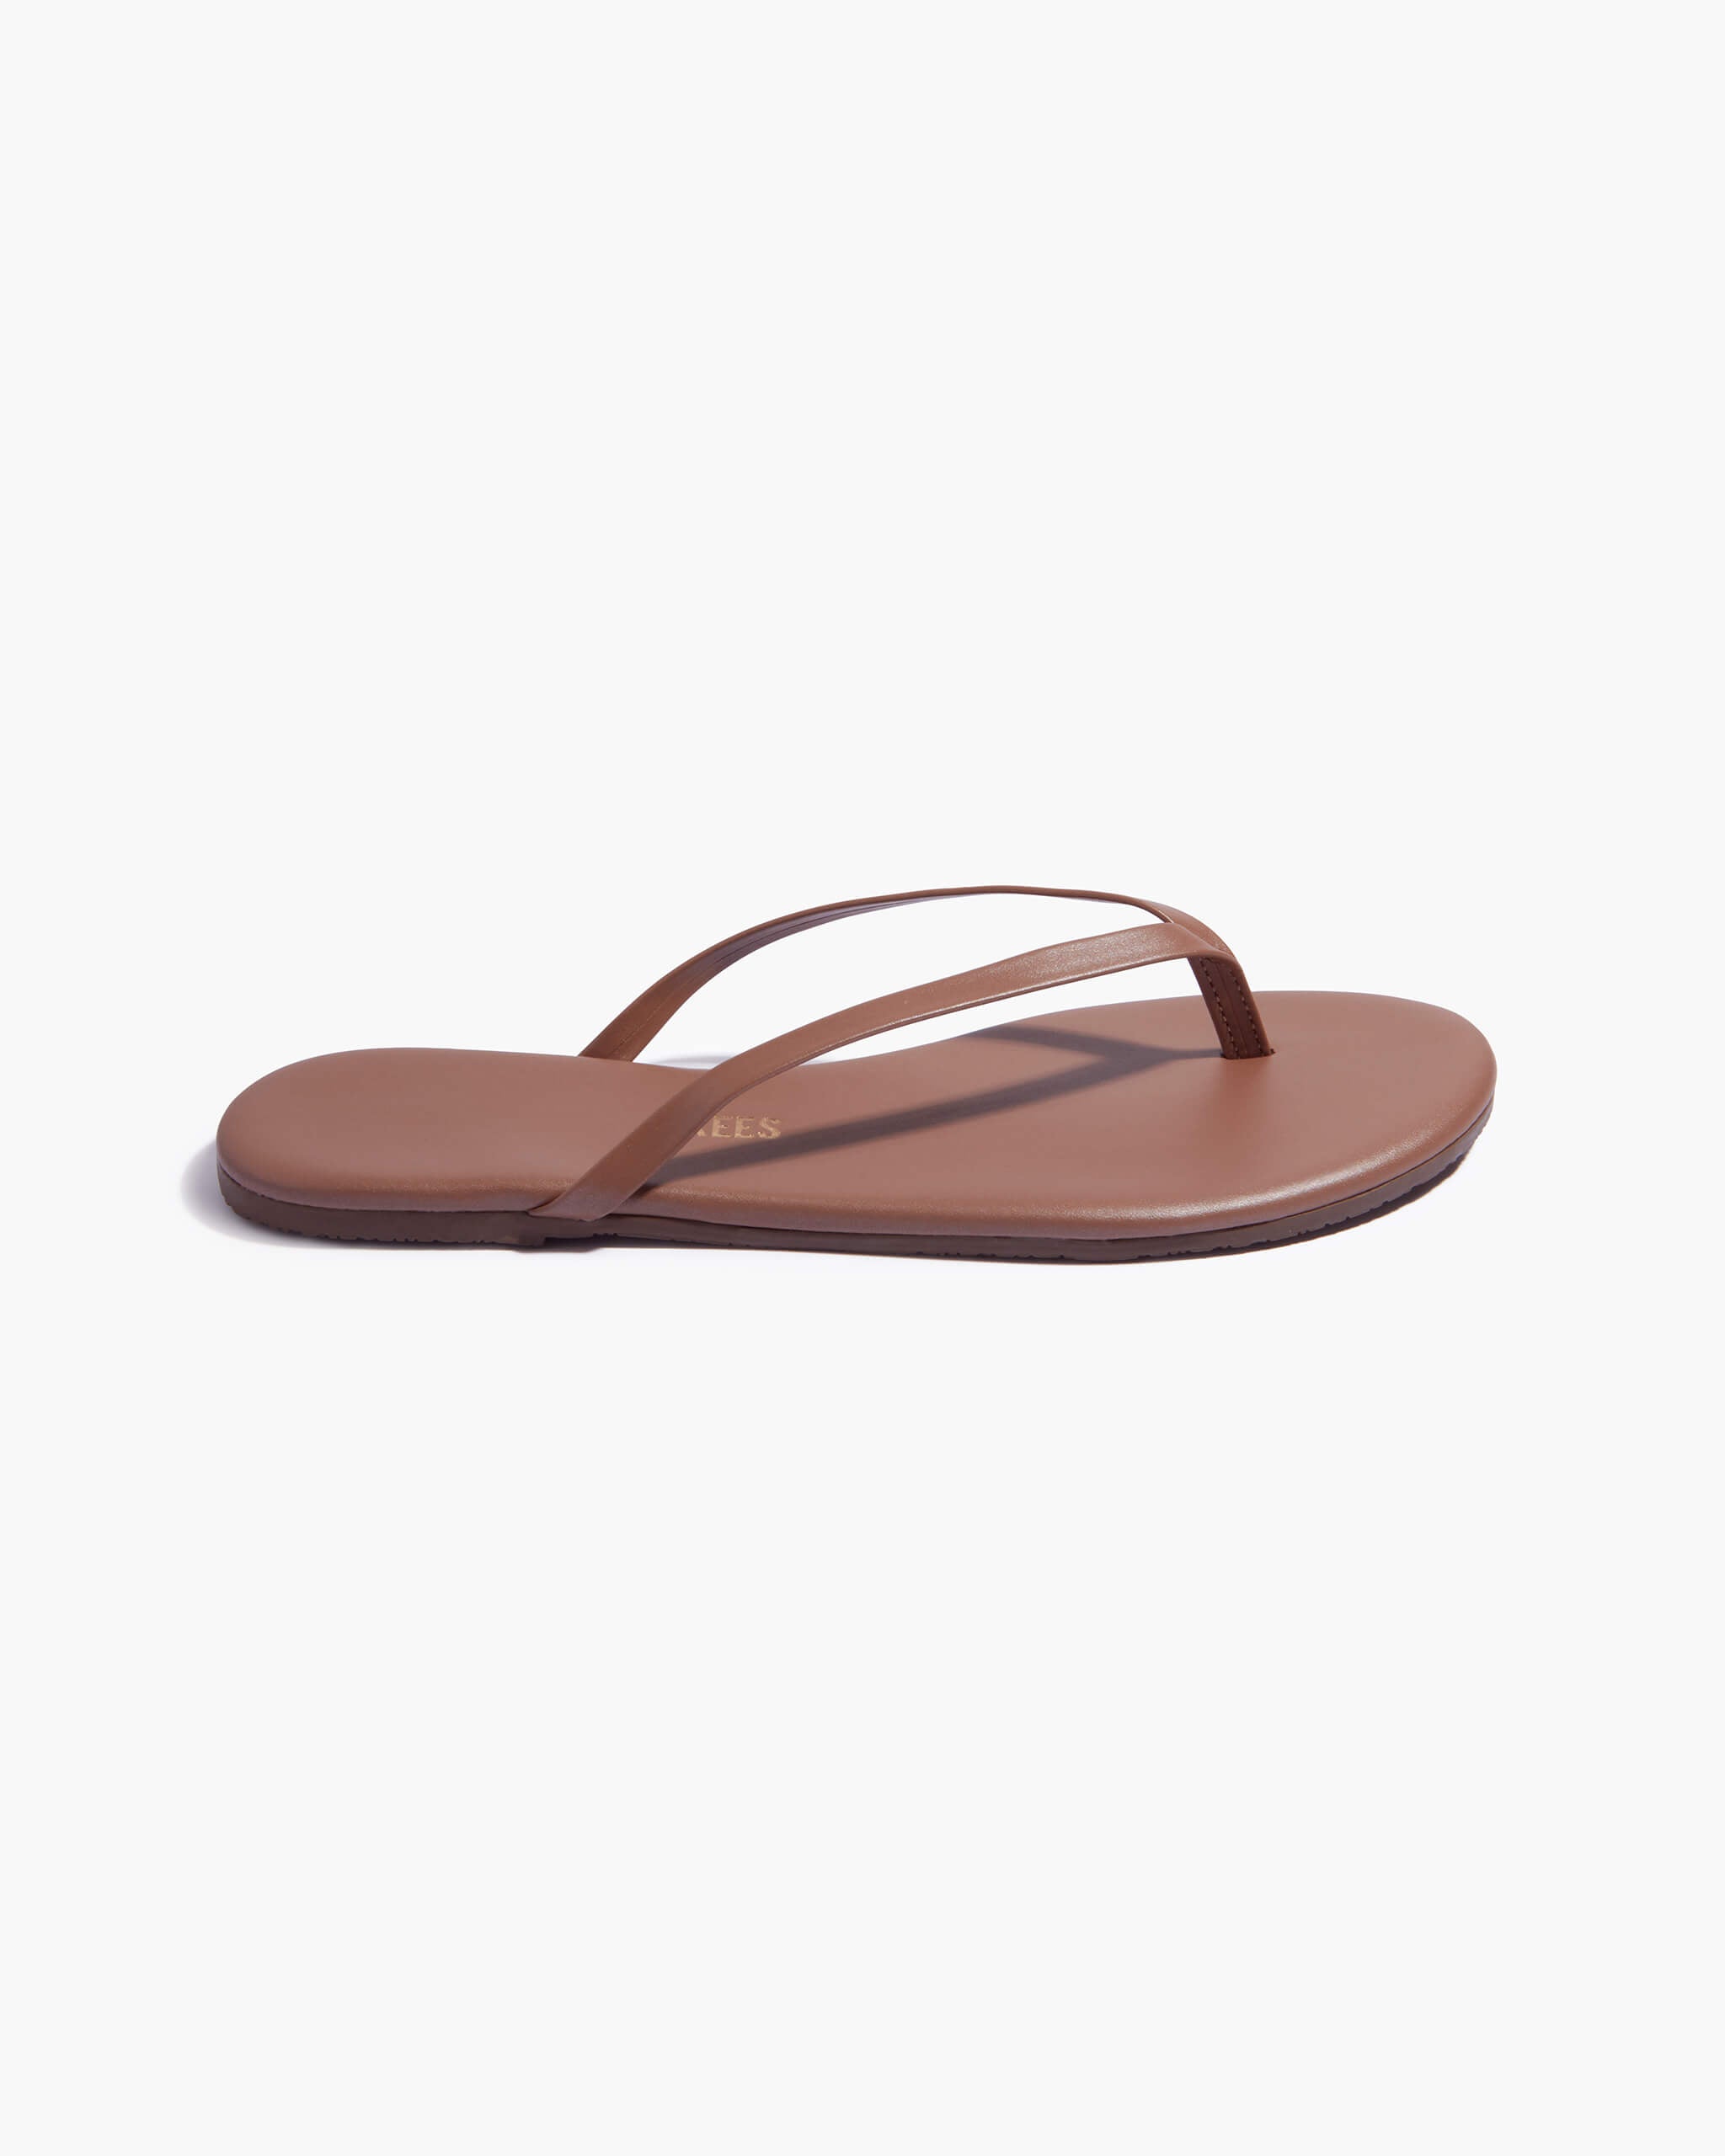 Lily Shimmers in Beach Bum | Women's Sandals | TKEES – TKEES